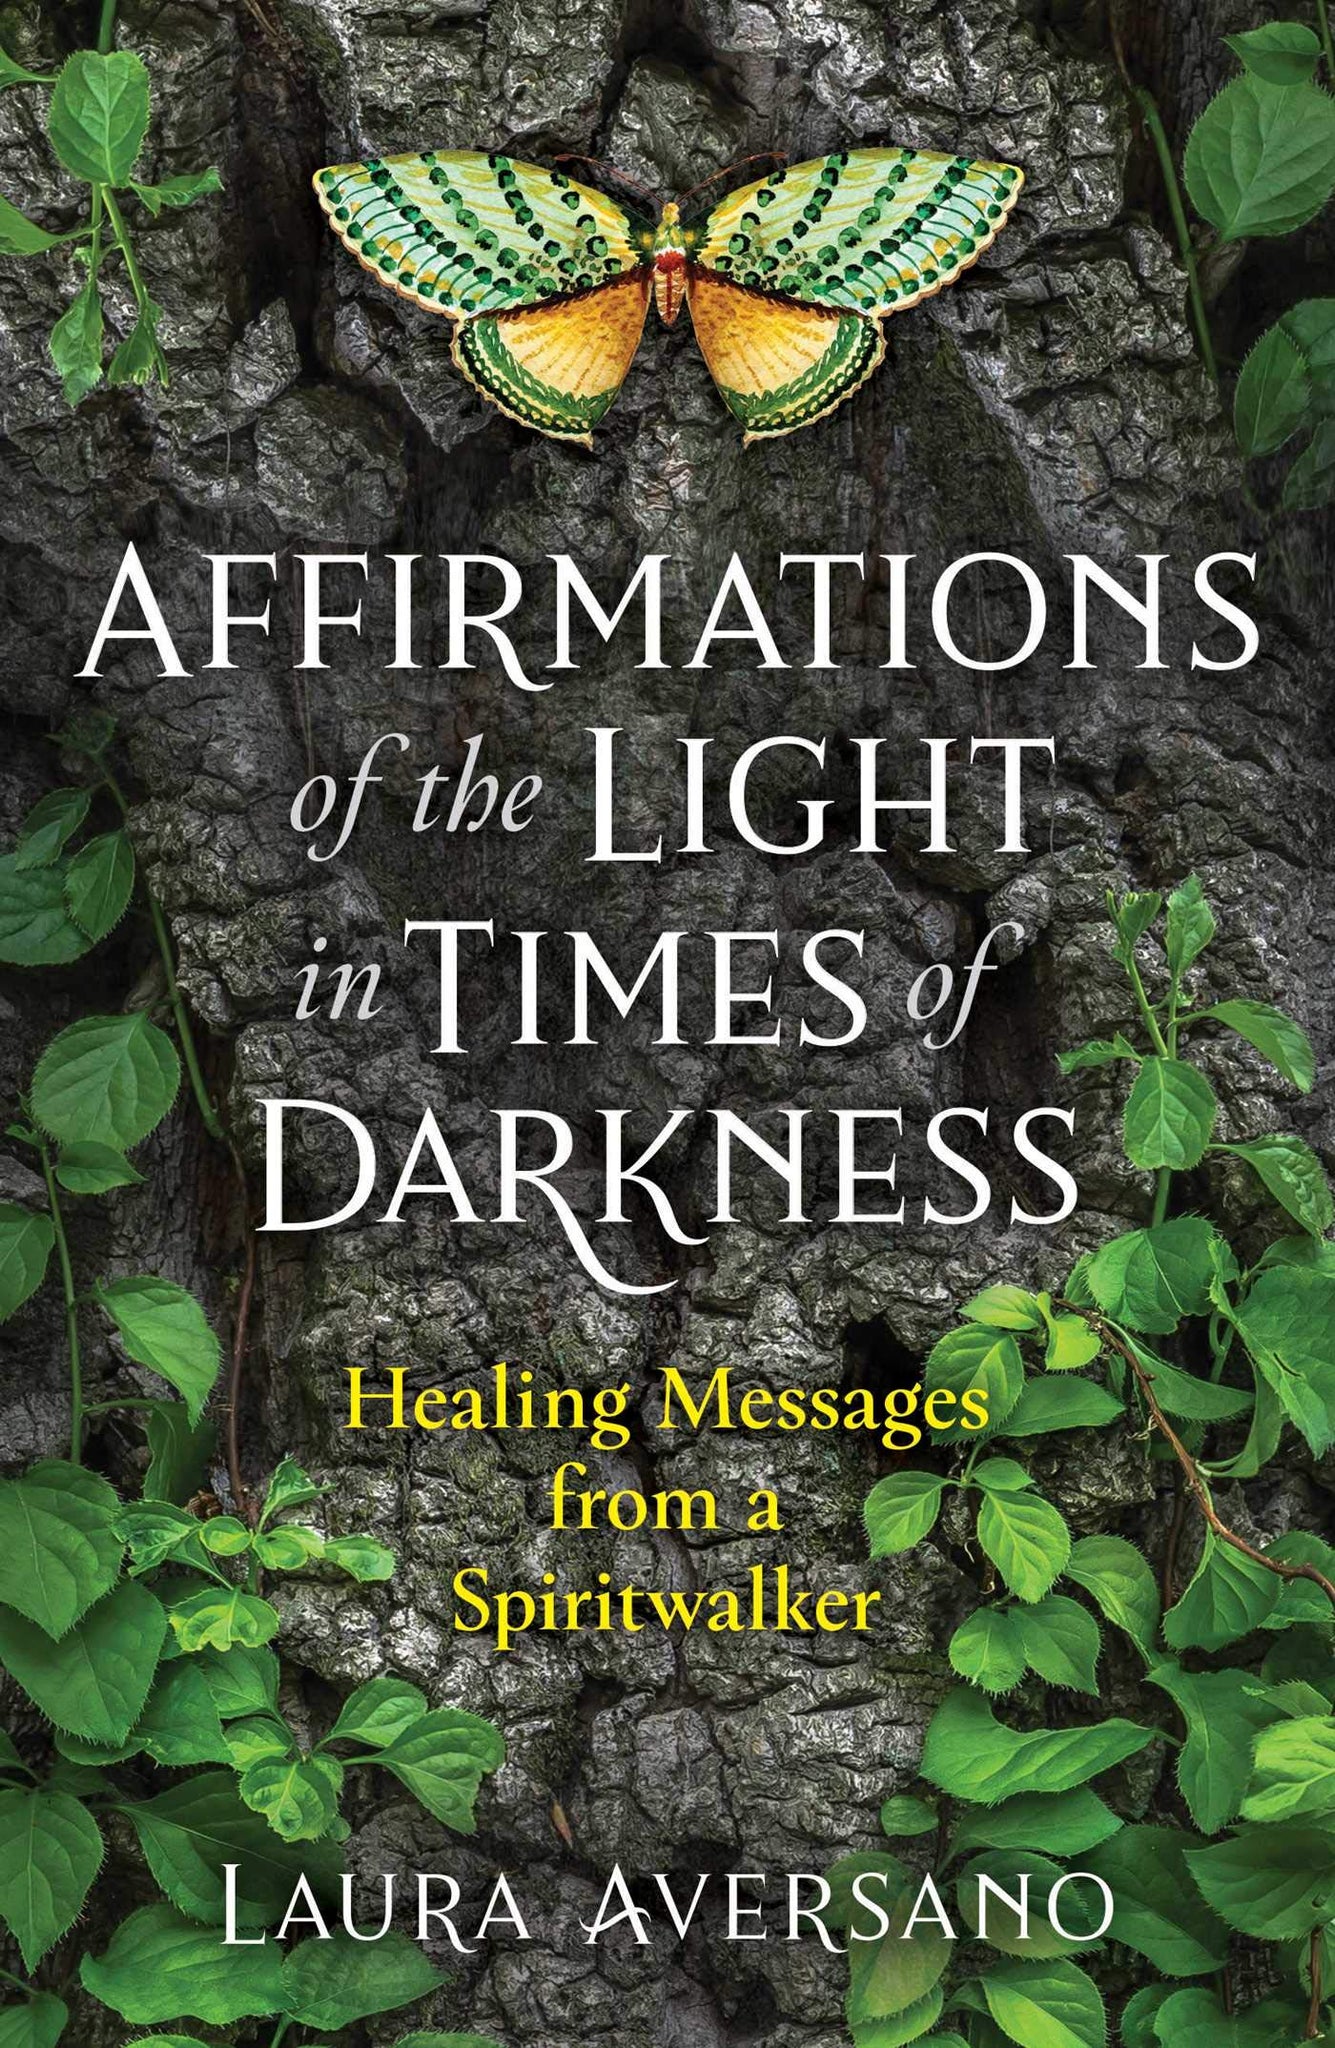 Affirmations of the Light in Times of Darkness by Laura Aversano